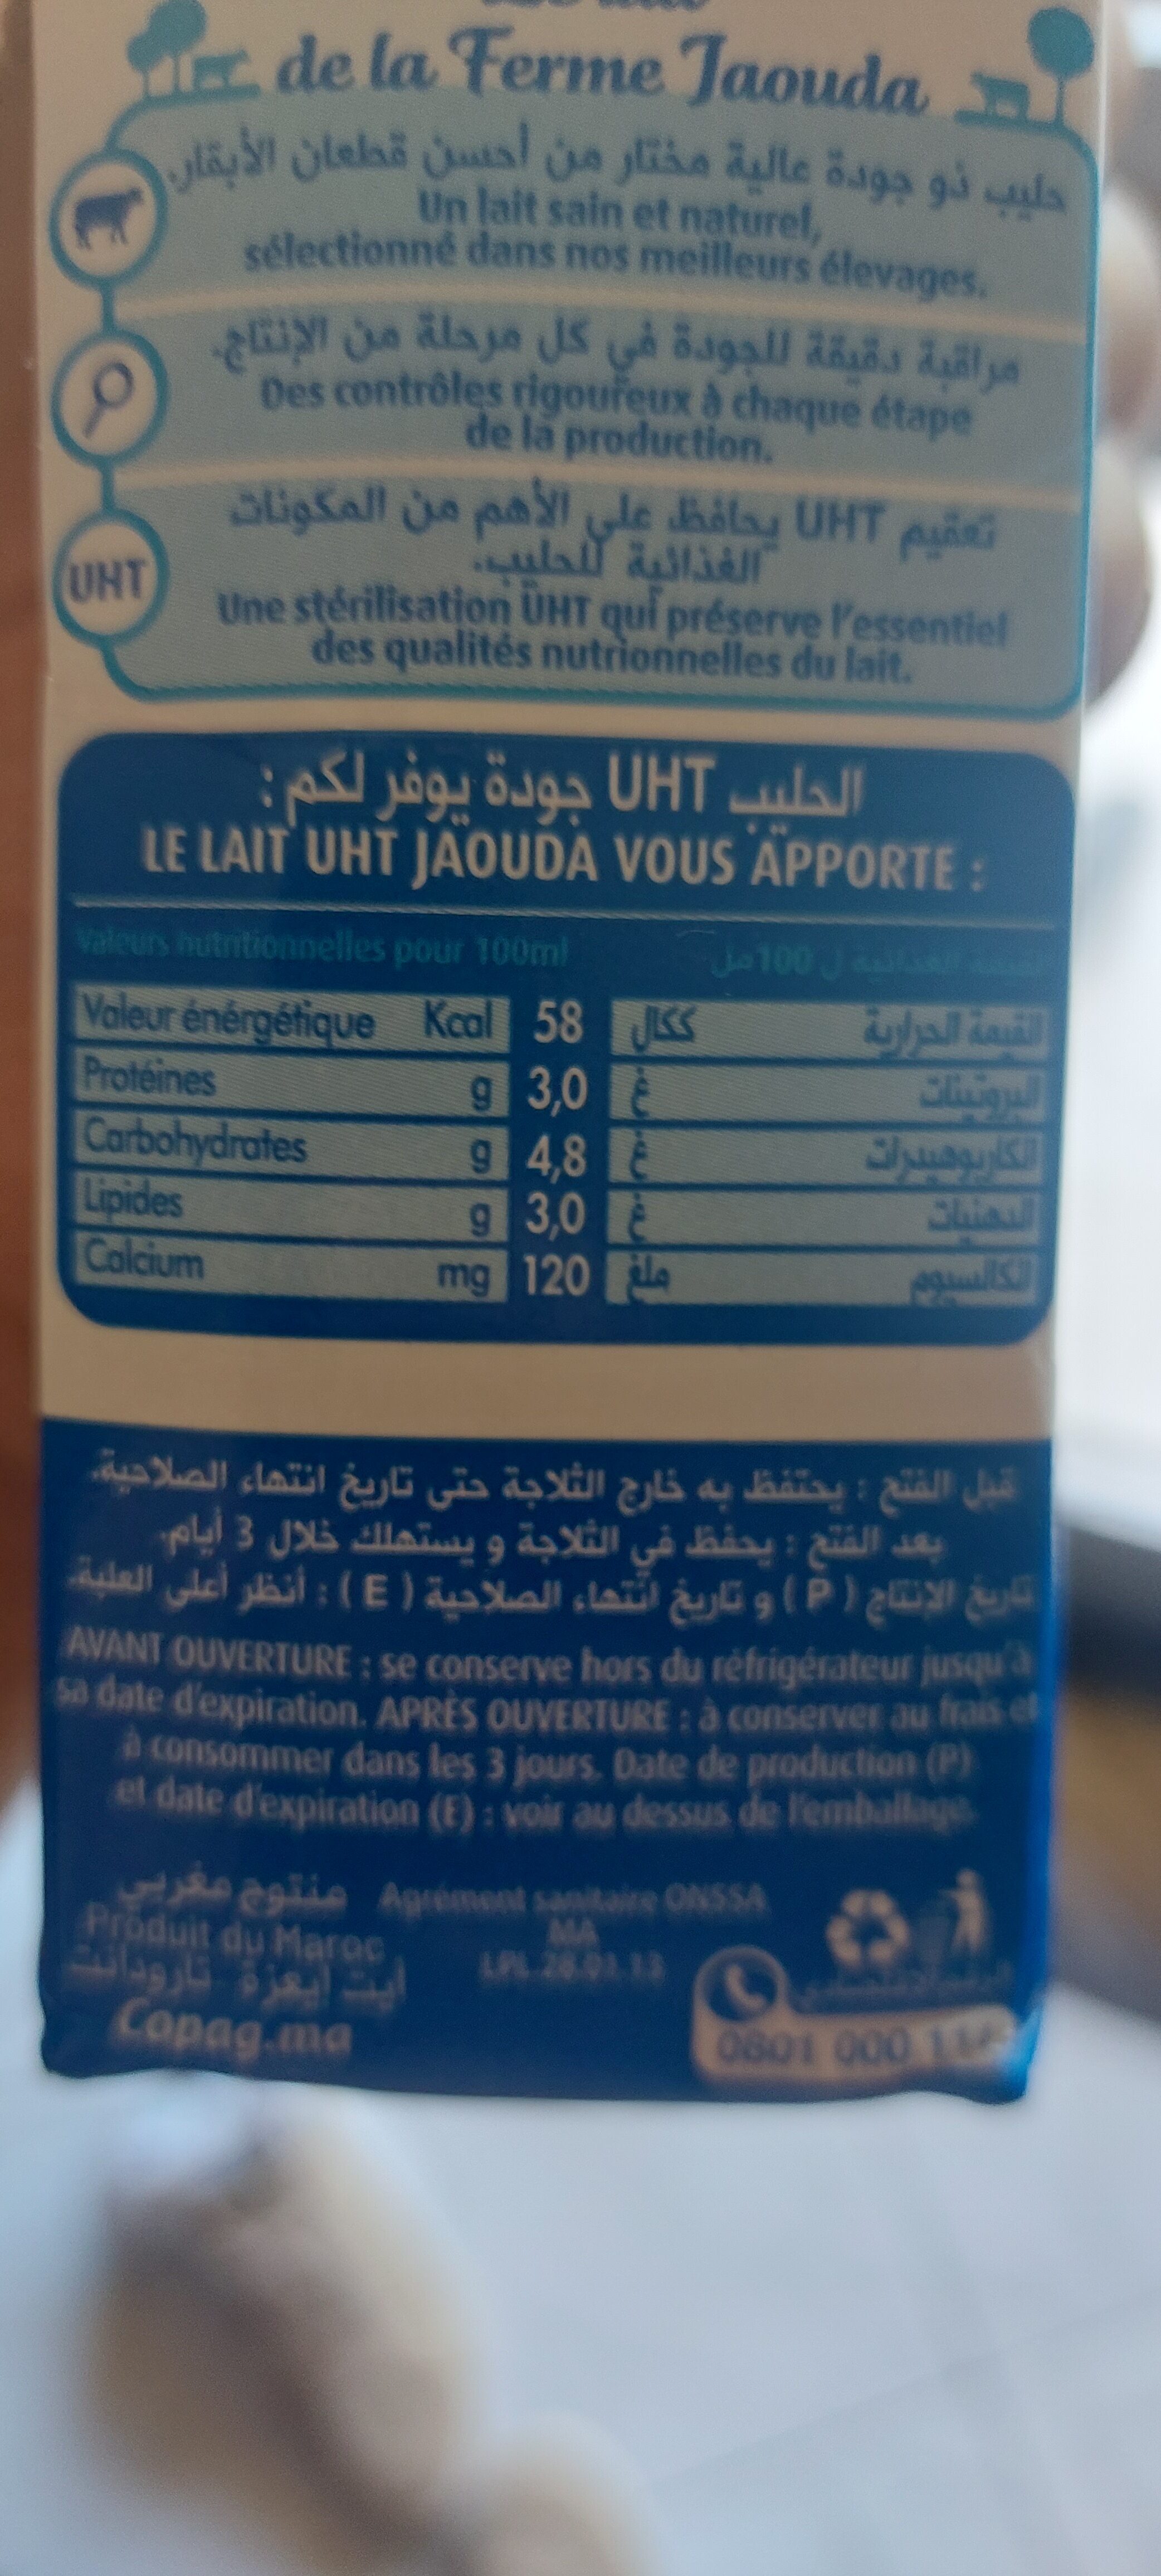 Lait Entier UHT - Recycling instructions and/or packaging information